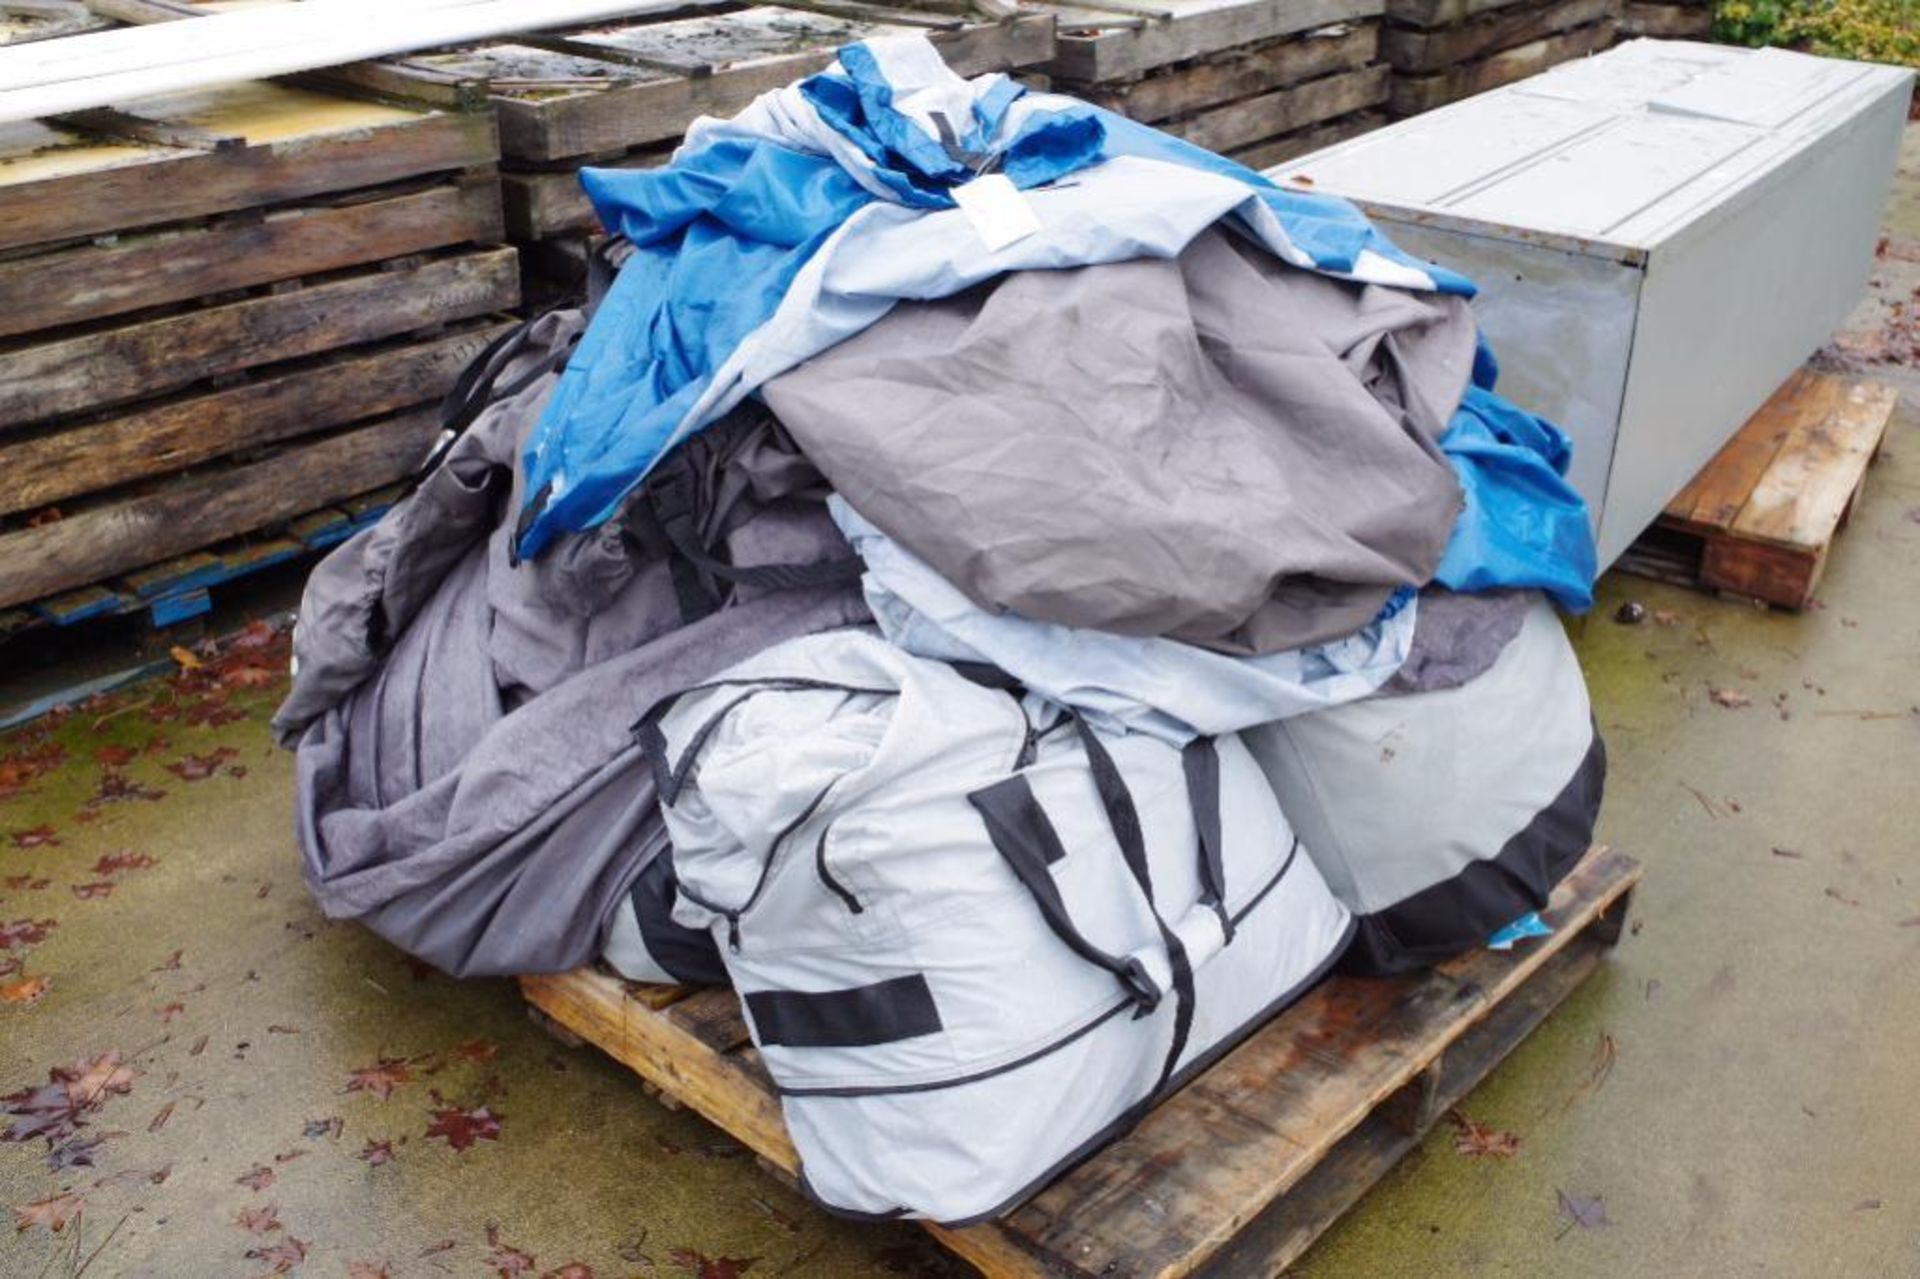 [Pallet] Asst. Tarps: Sizes, Fabric & Condition Vary - Image 2 of 2